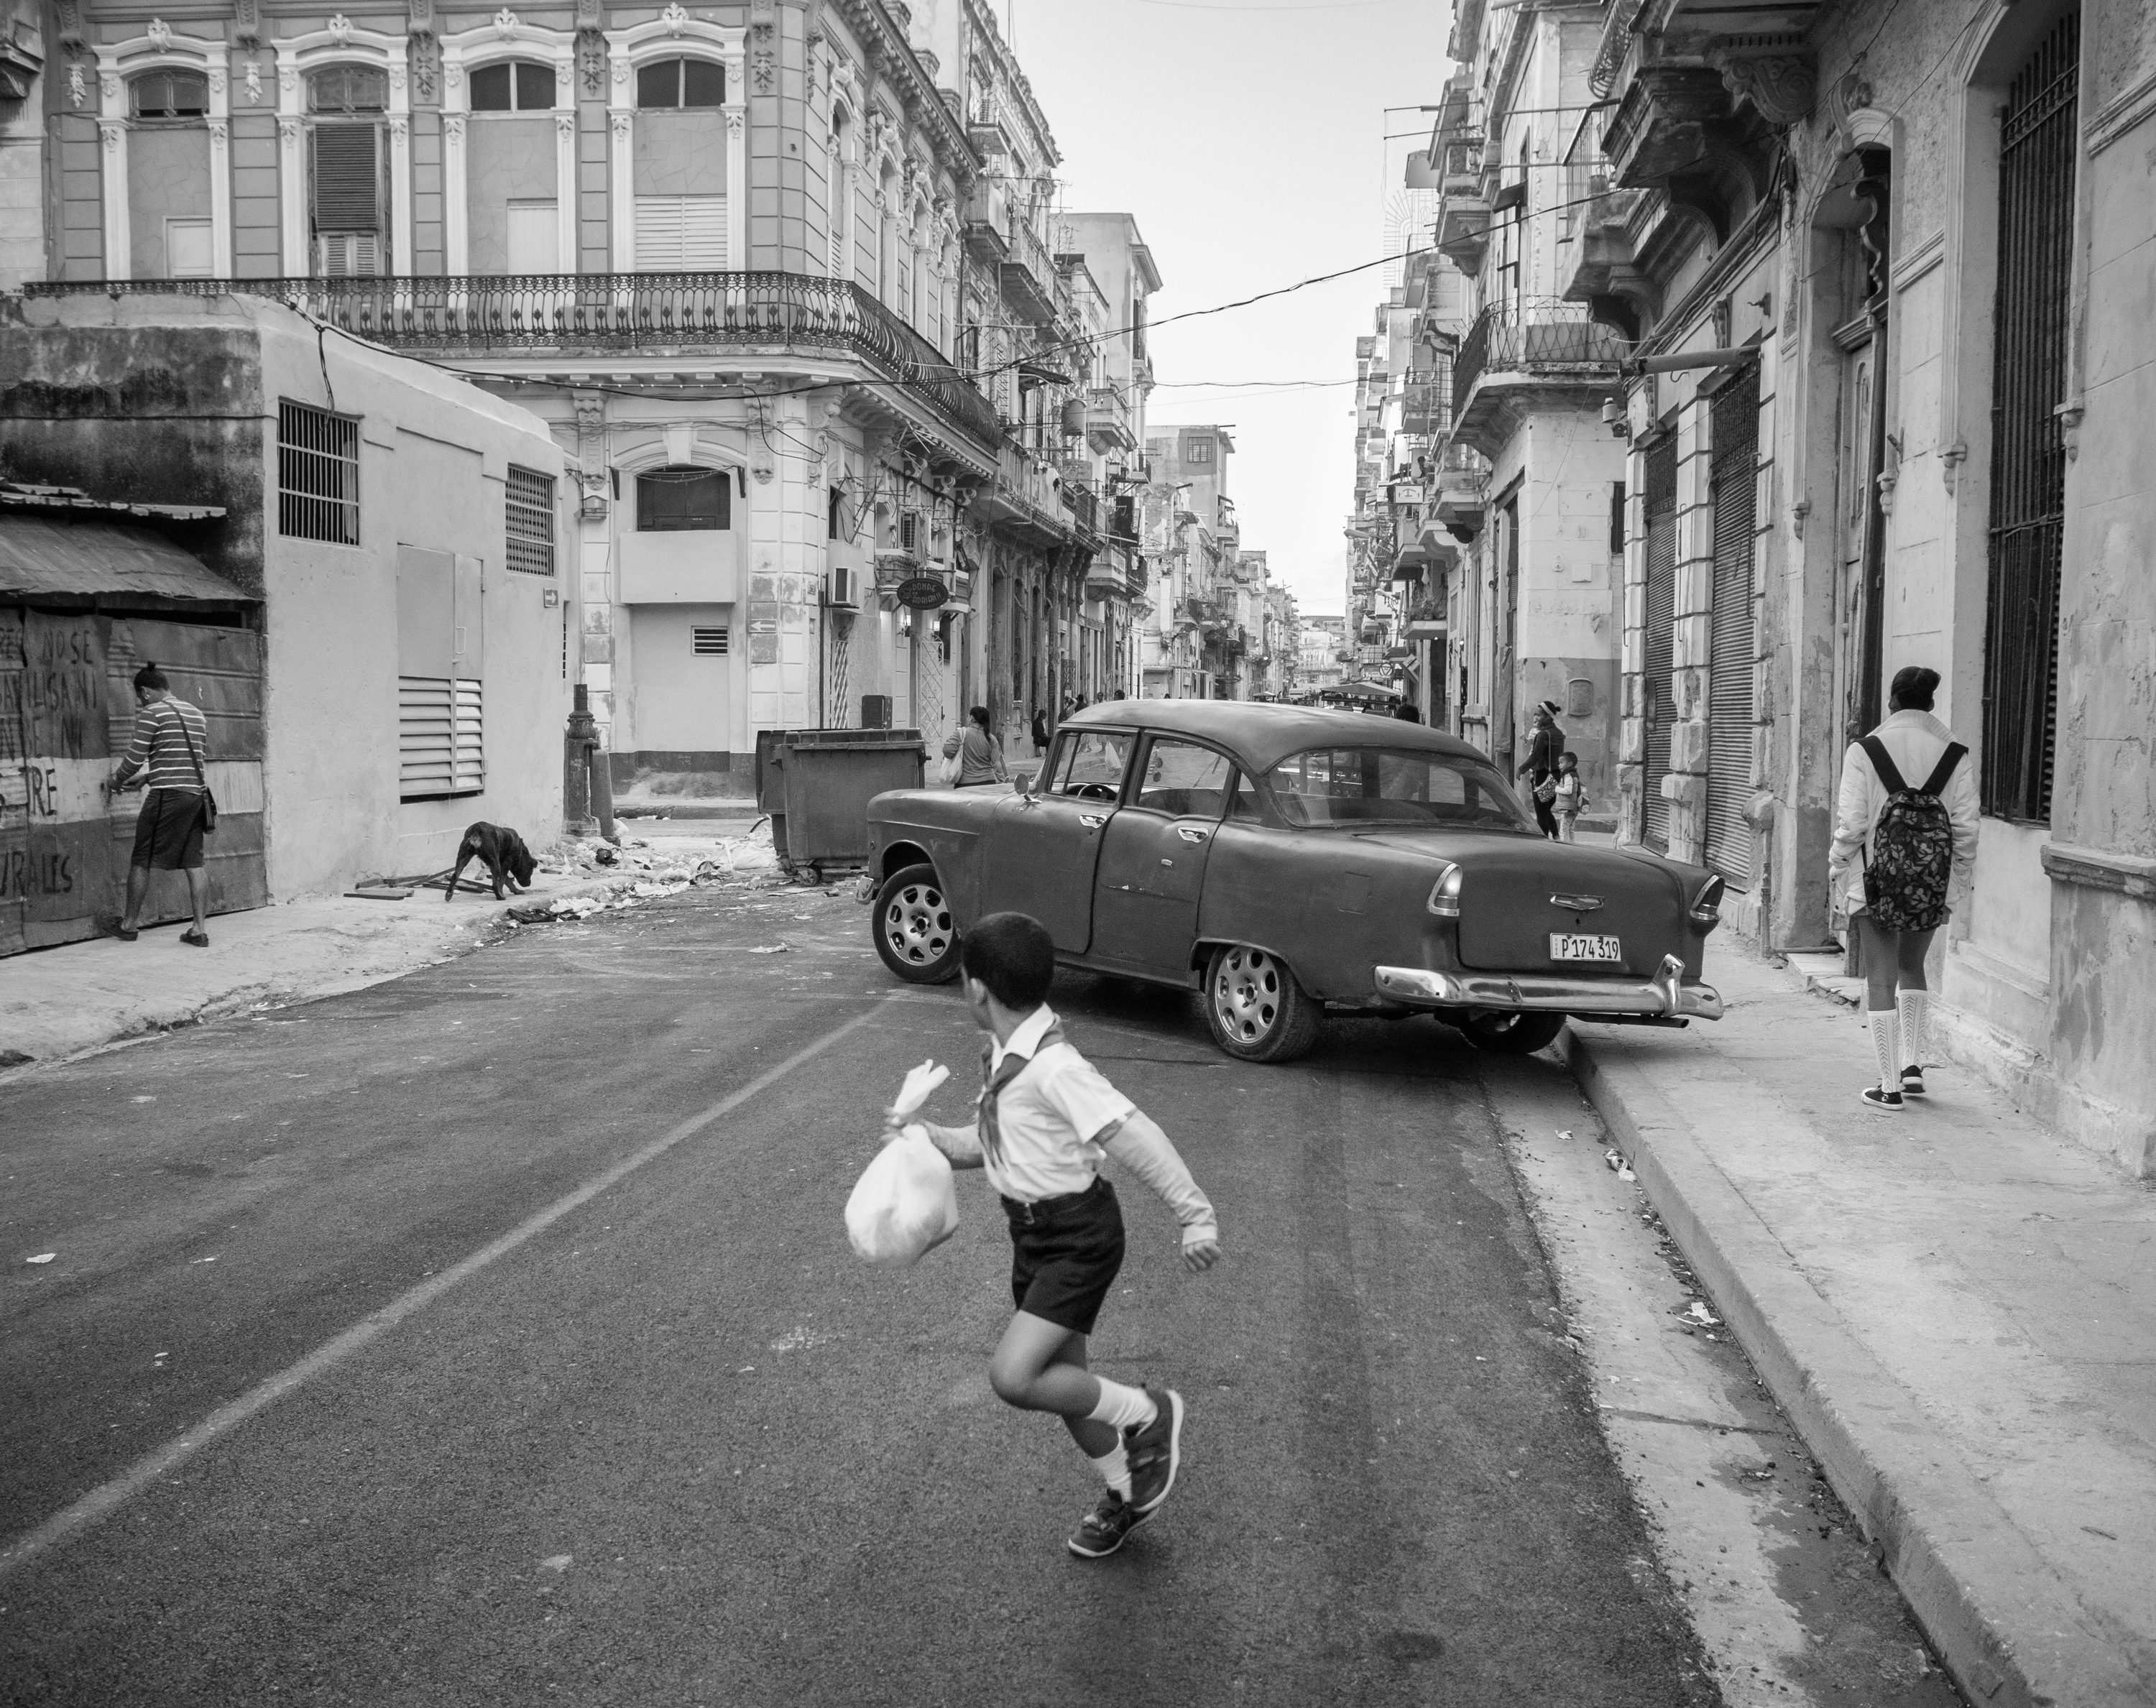 Young boy running in street